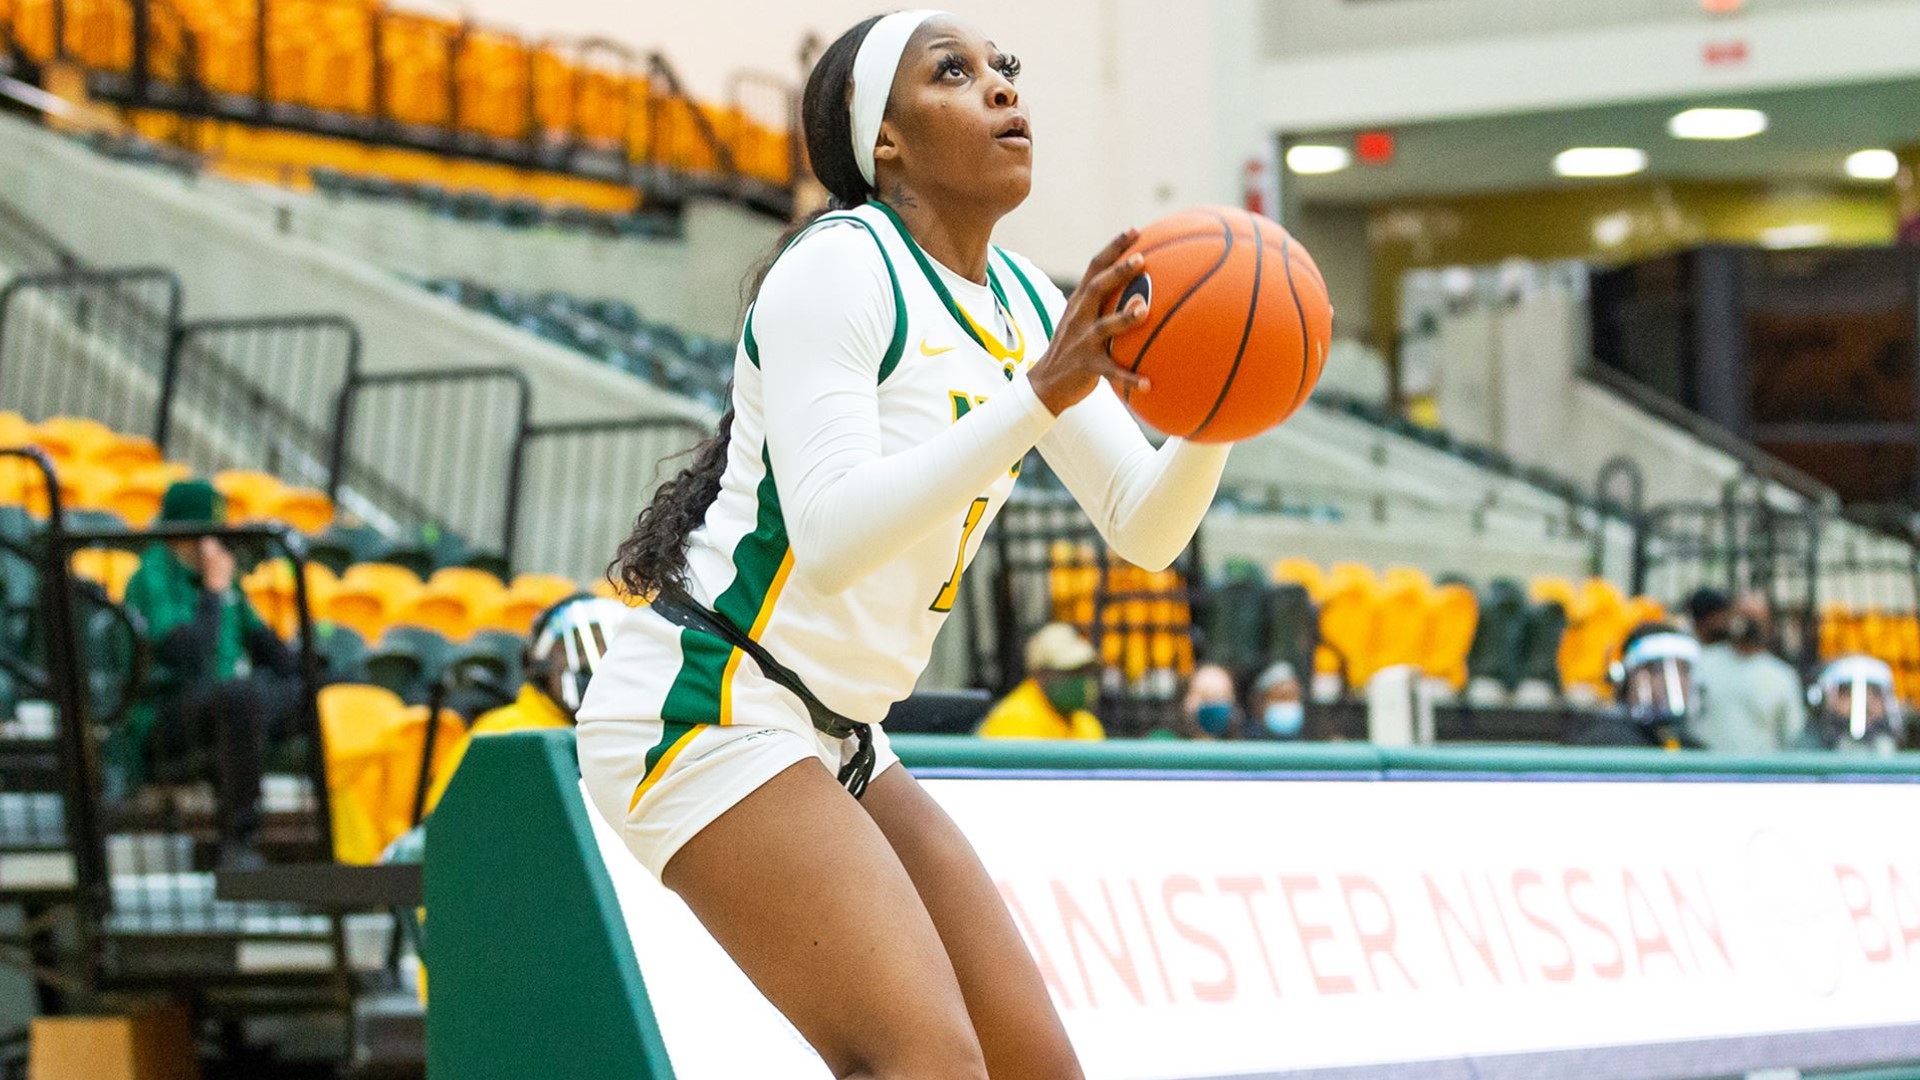 NSU kept battling and cut its deficit to 48-44 on a triple by Morris with 1:51 remaining in the game. But the Eagles scored the game’s final nine points.